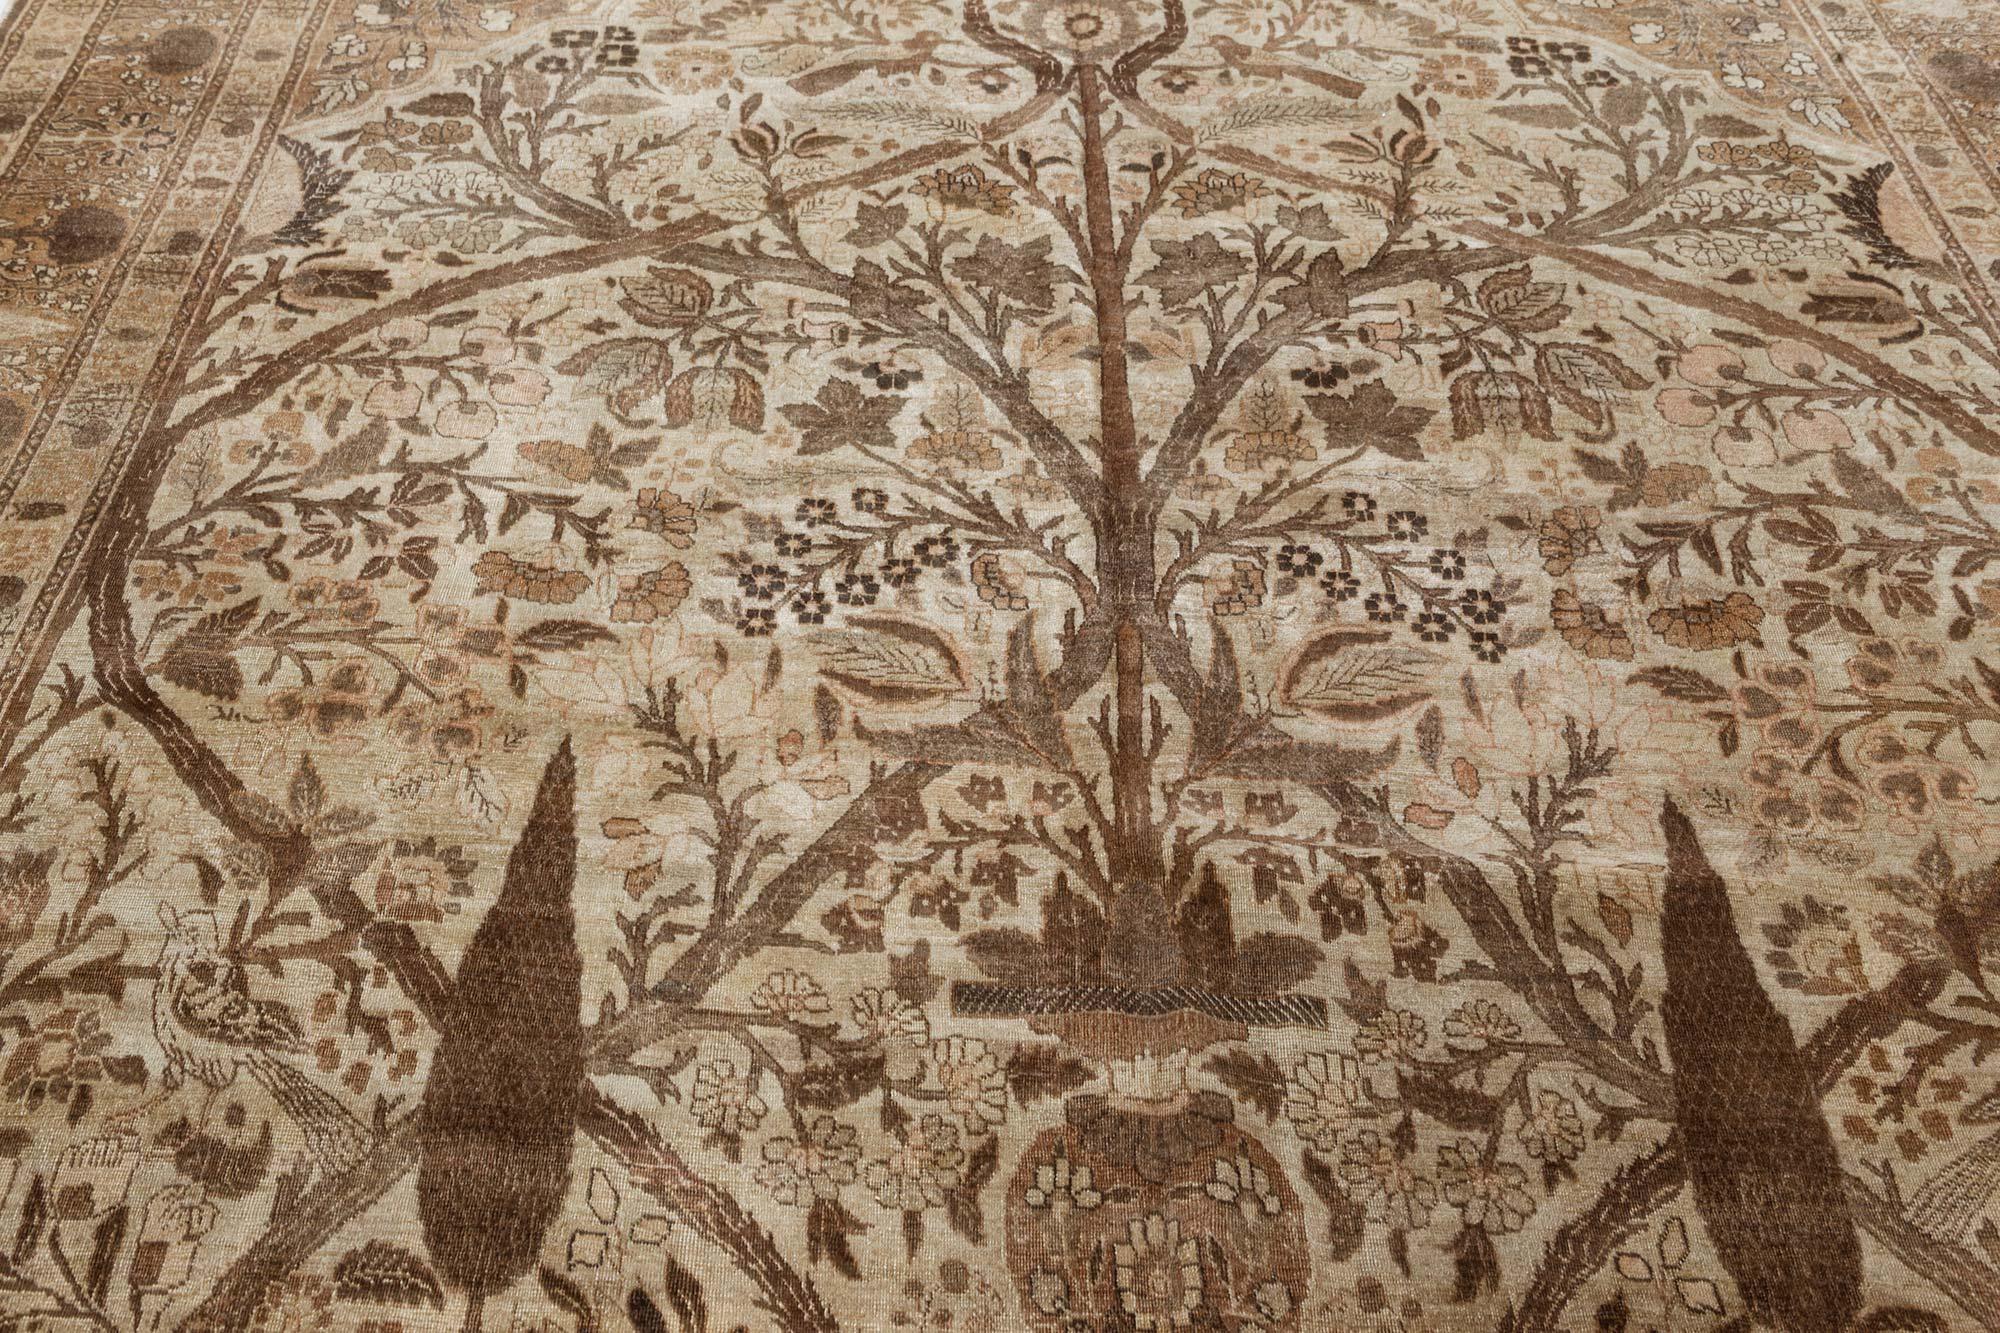 Autehntic Persian Tabriz Handmade Wool Rug
An unusual early 20th century Persian Tabriz rug, having a sand field and a spacious garden design with flora and fauna overall framed by an large flowering tree and a large cocoa vine within a tan tree and